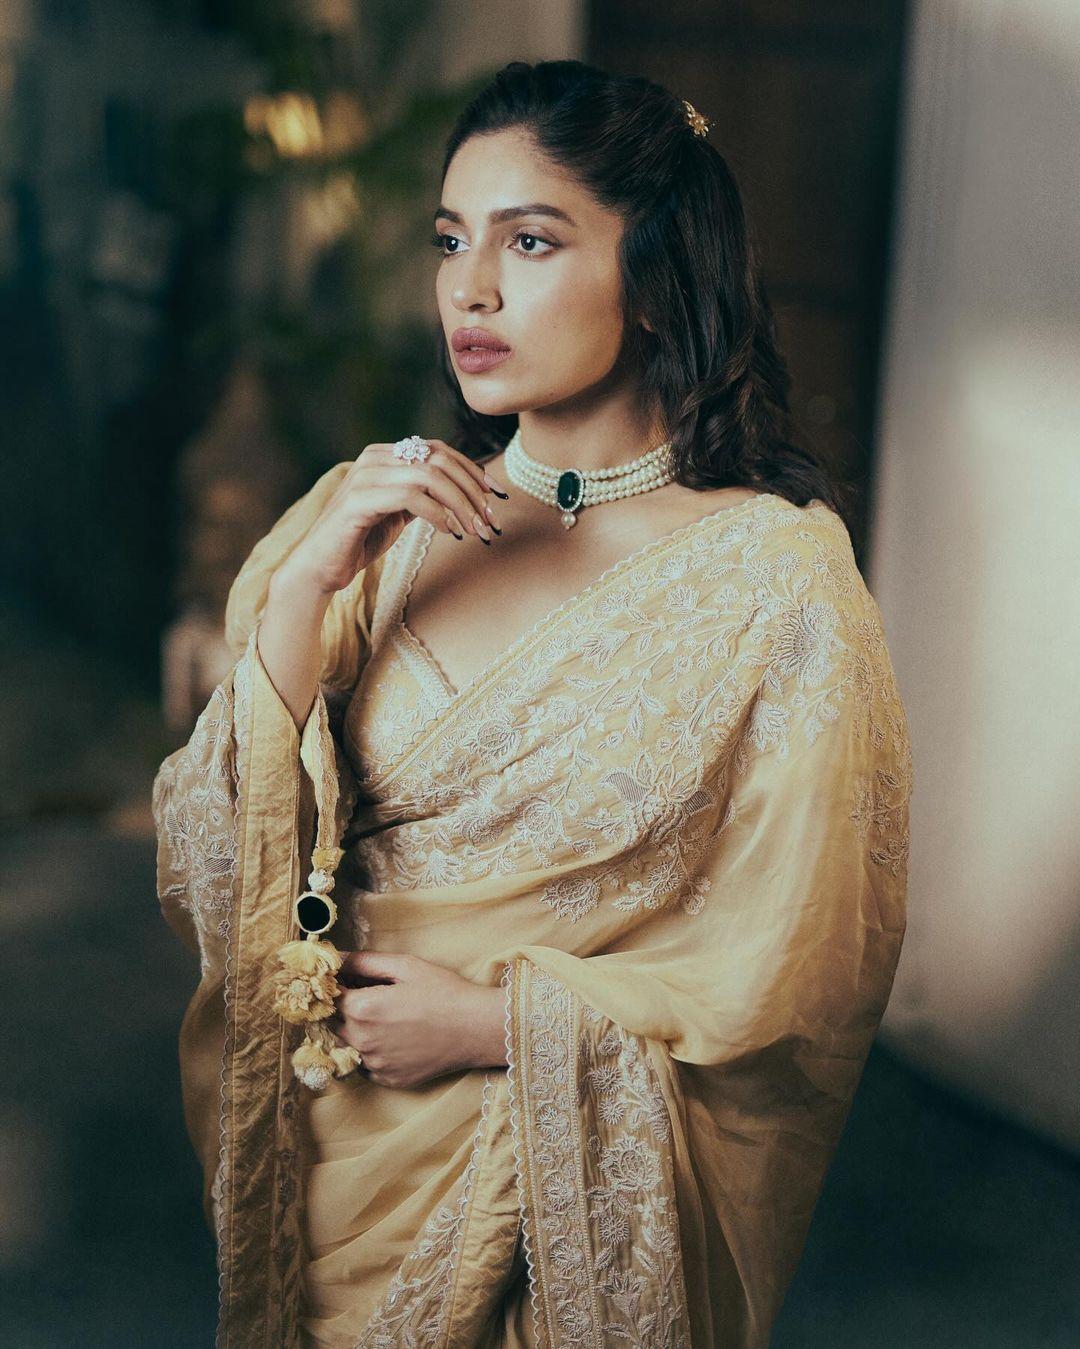 Bhumi applied sharp makeup, enhancing her appearance. She adorned a stunning pearl necklace with a contrasting green gem. Tying her hair in a stylish hairstyle, Bhumi added a potli bag to finish her appearance